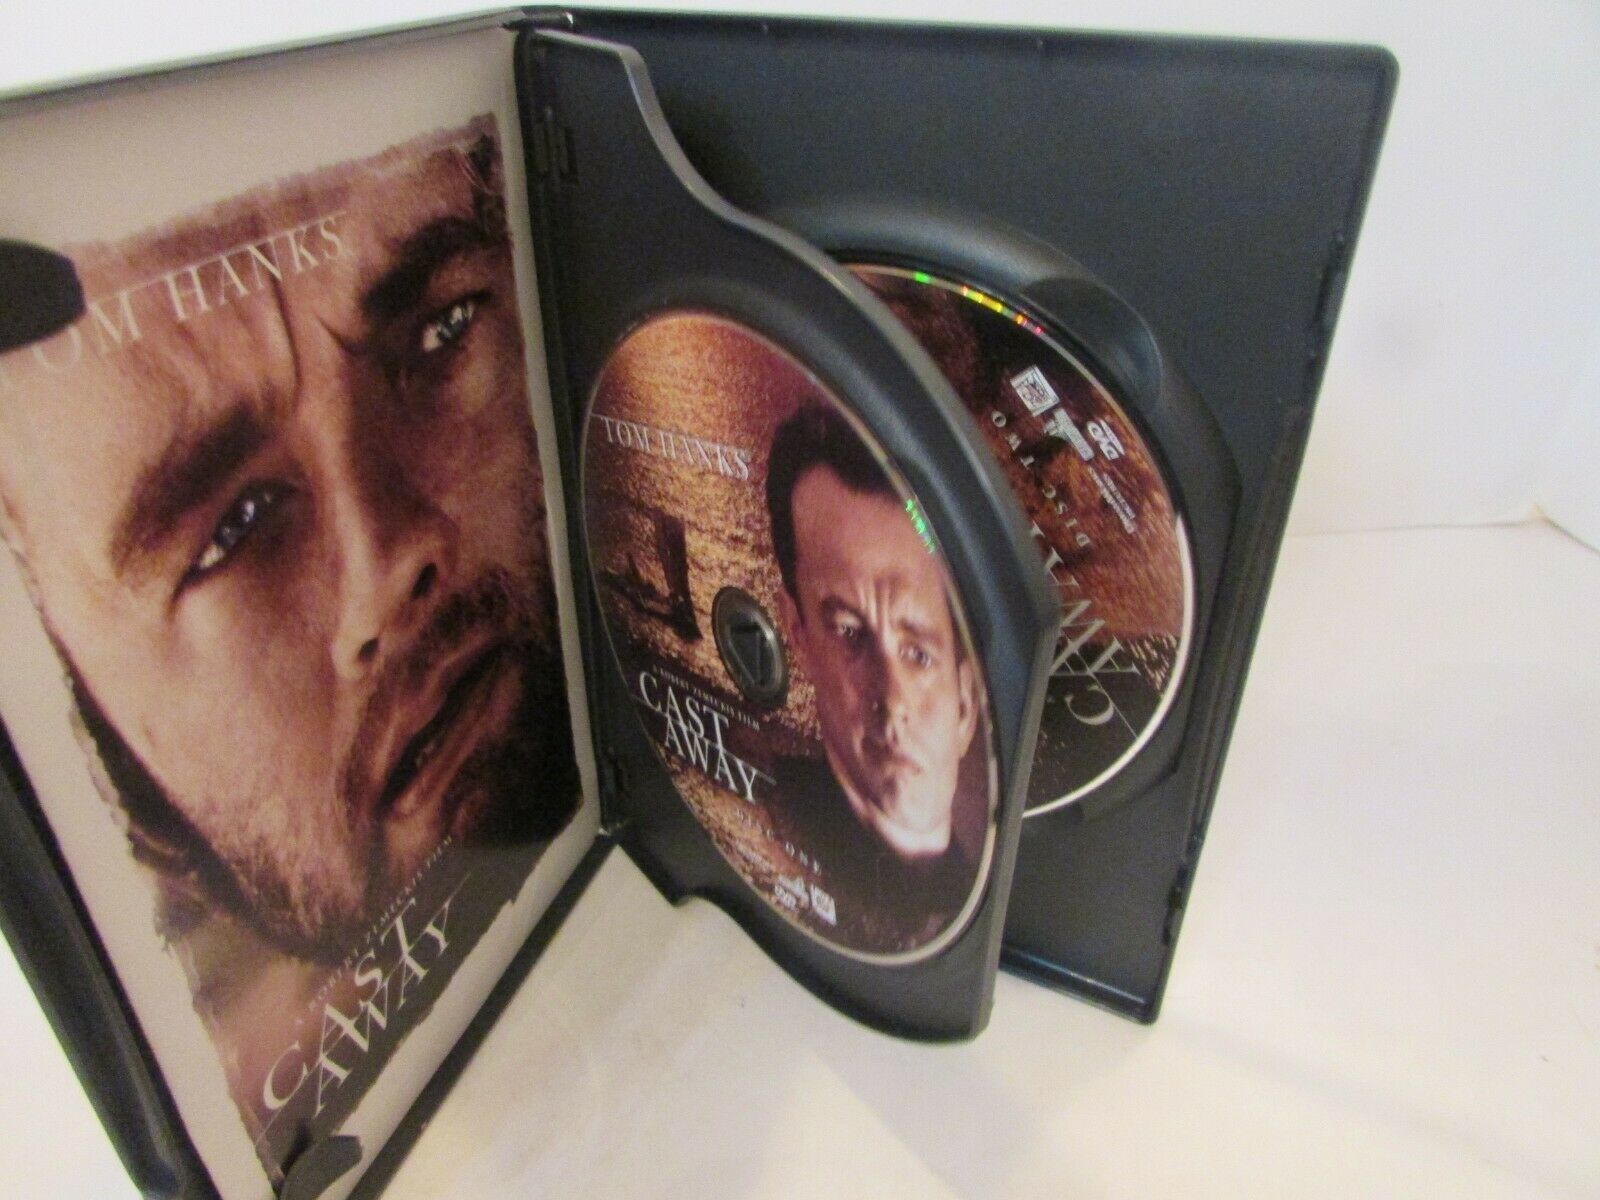 CAST AWAY DVD STARRING TOM HANKS 2 DISC SET WITH CASE - DVDs & Blu-ray ...